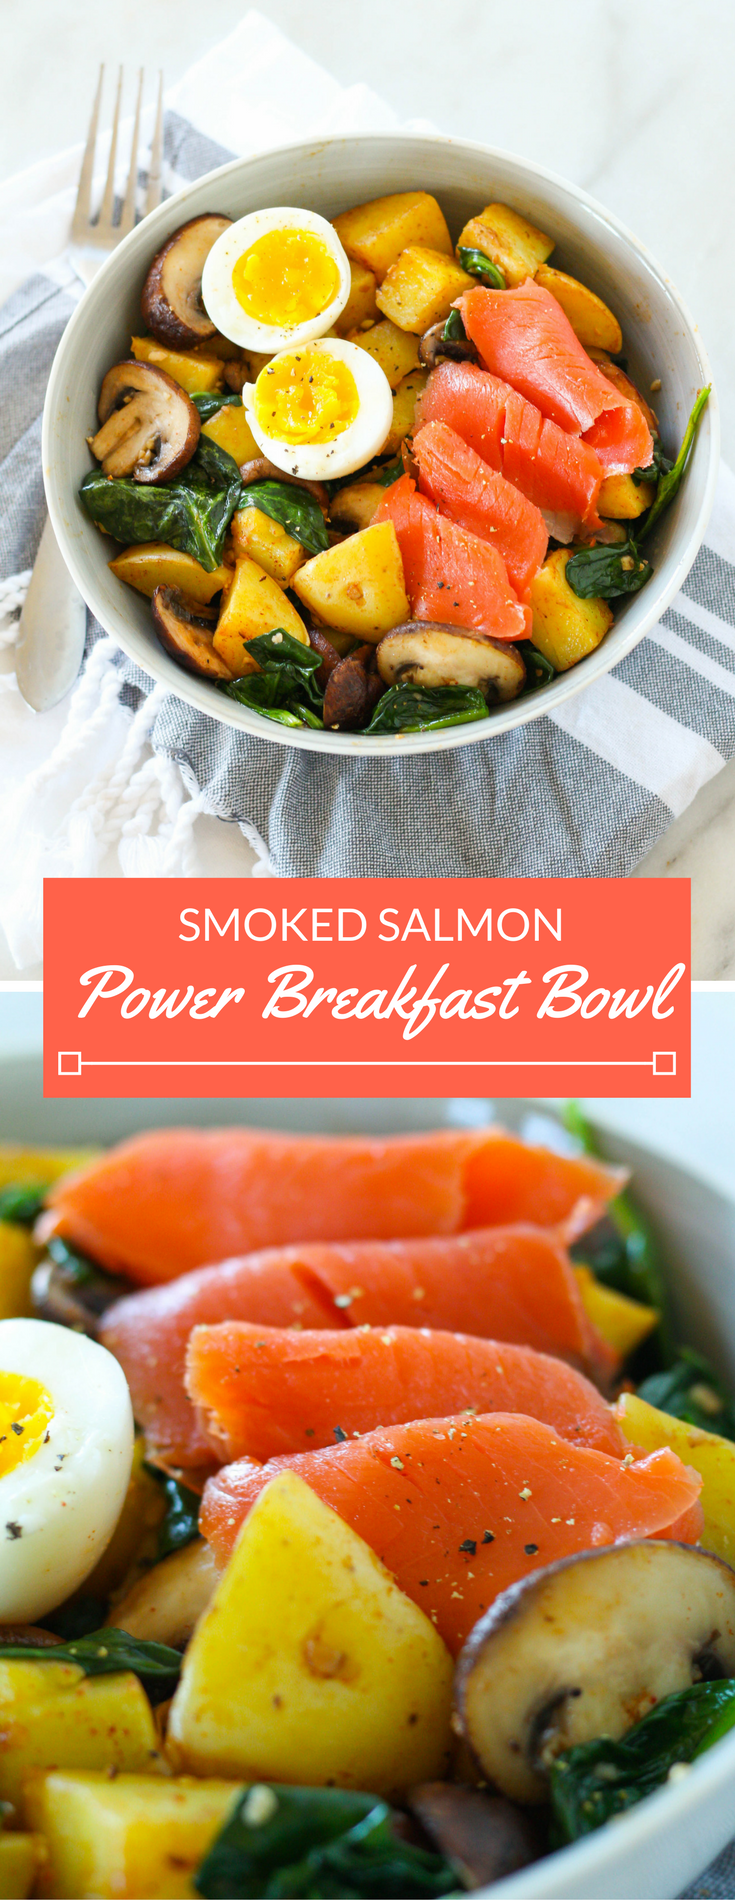 This protein packed smoked salmon power breakfast bowl is the perfect way to start your day! Fill up on fiber and vitamins from the veggies, healthy starch from the potatoes, and savory smoked salmon and an egg for protein. 